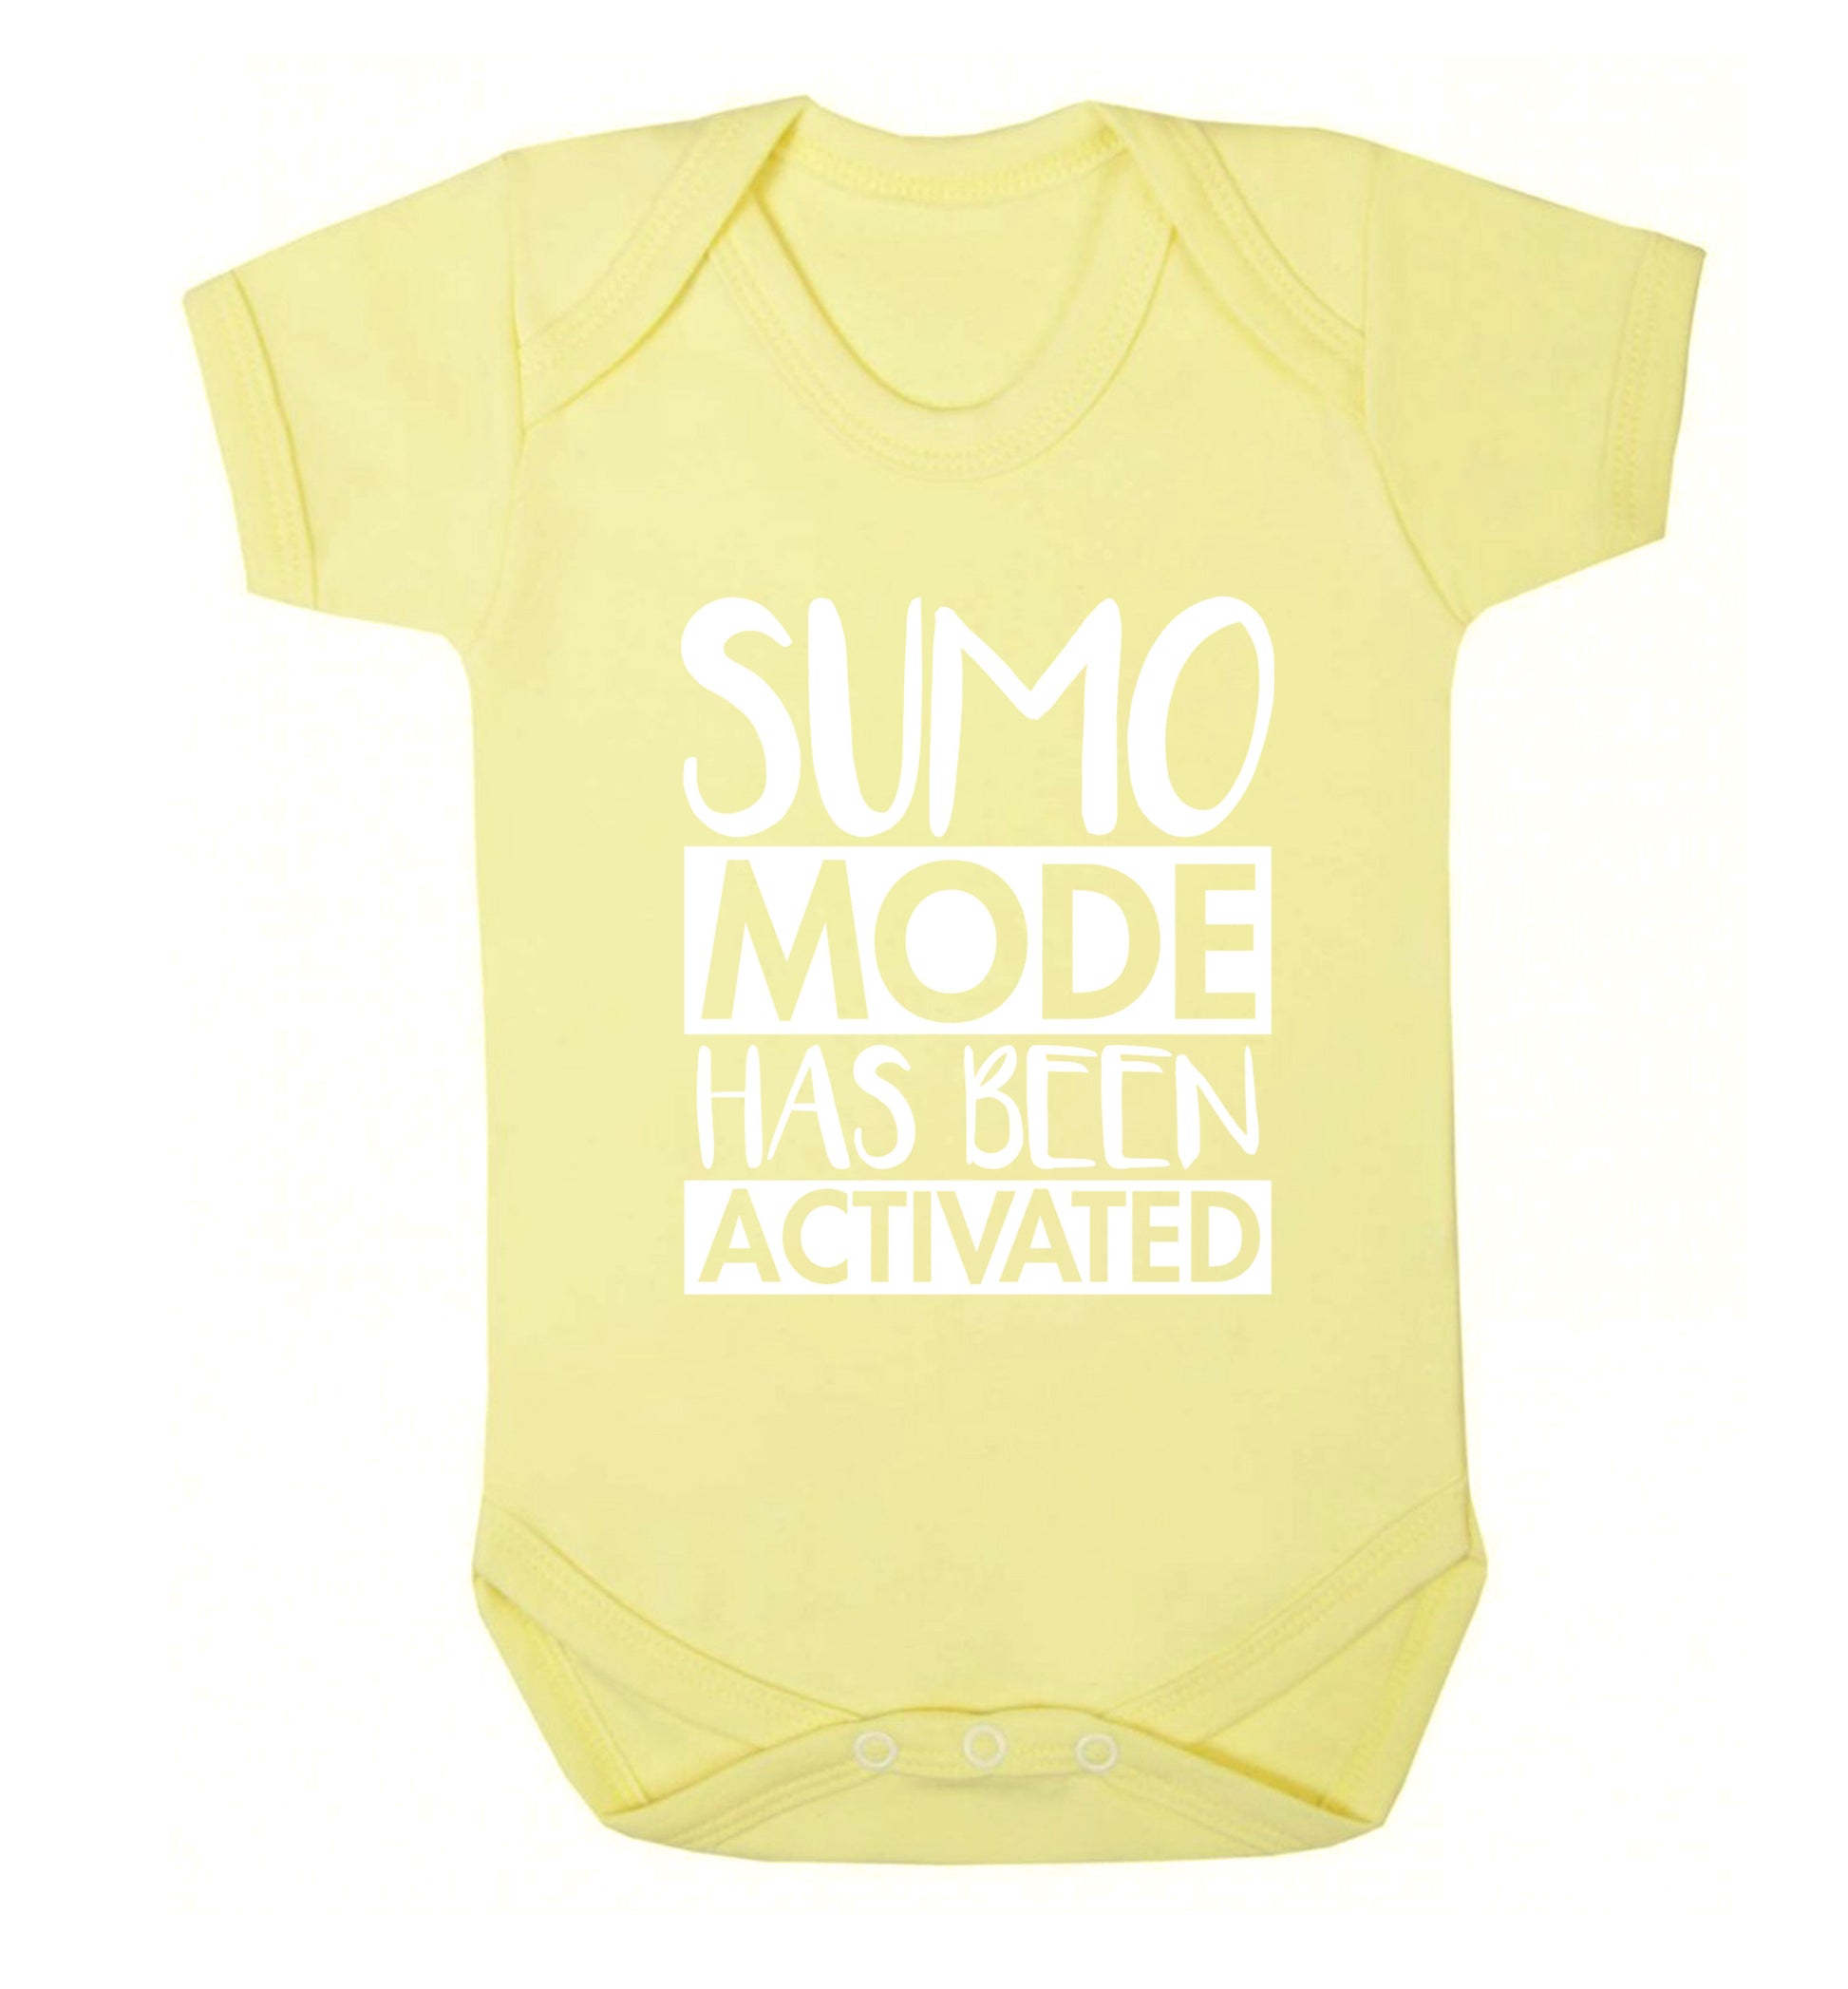 Sumo mode activated Baby Vest pale yellow 18-24 months